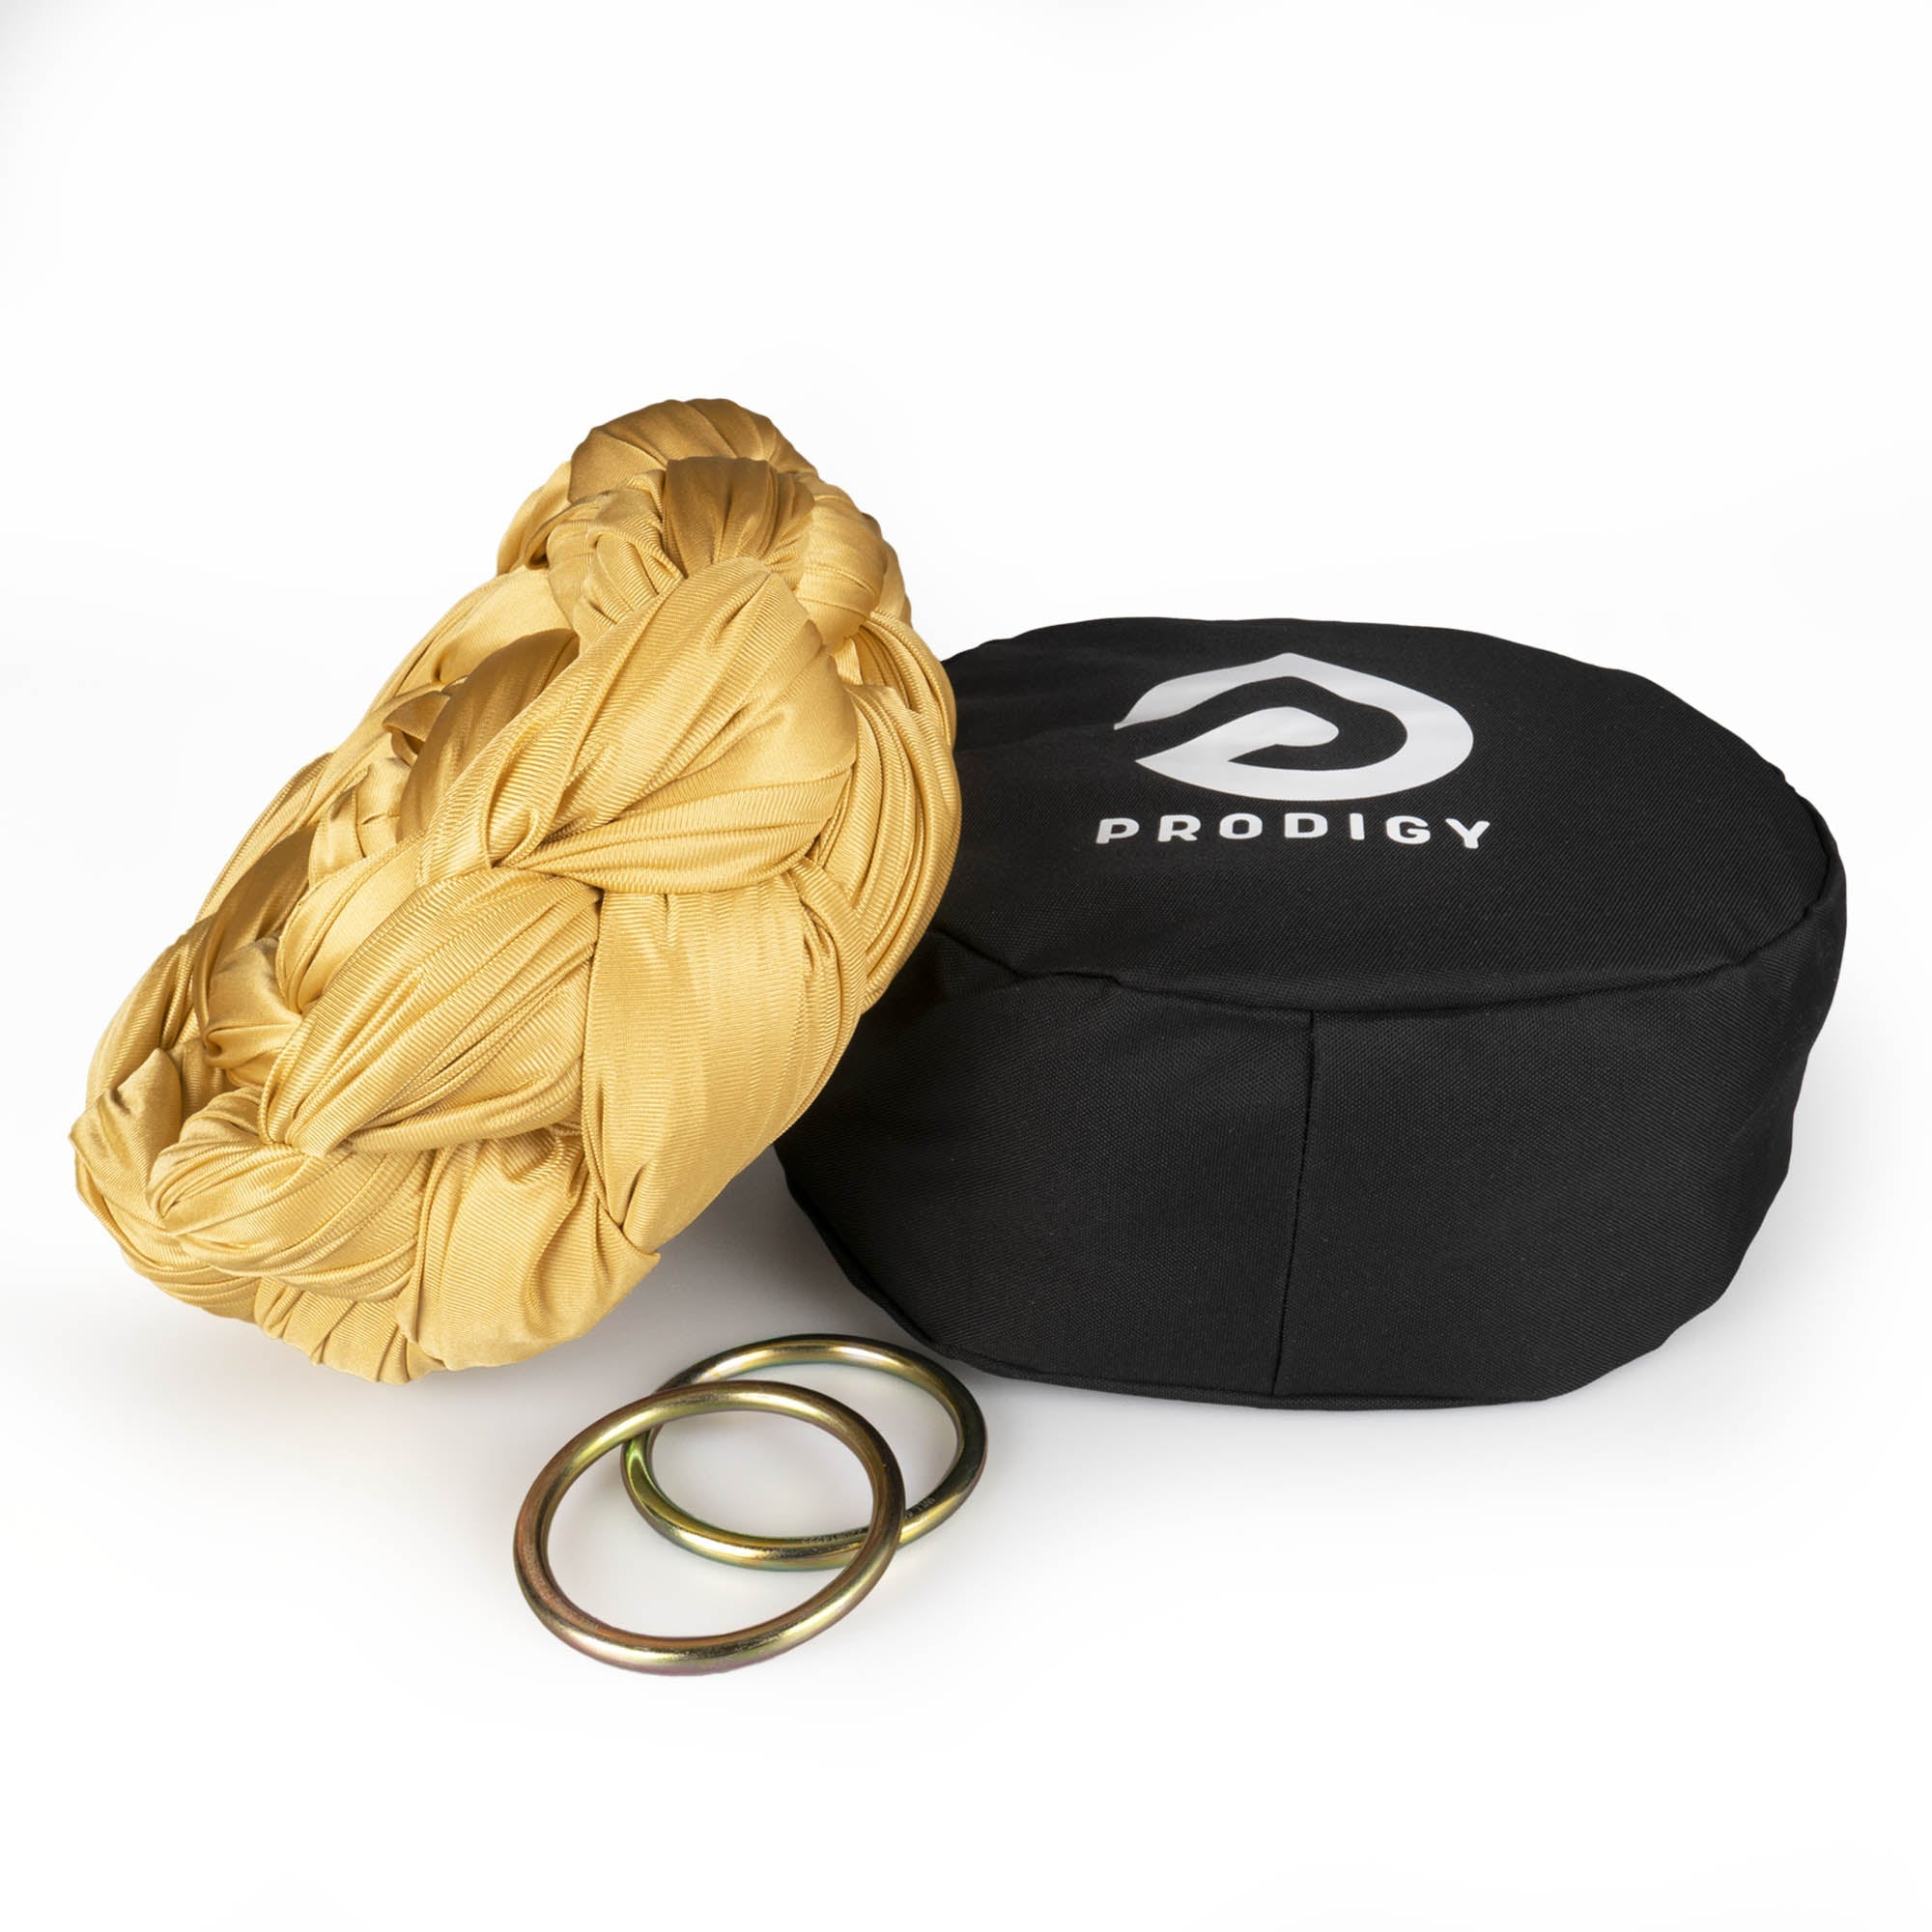 Prodigy aerial sling and O rings and bag - gold sling resting on hammock bag